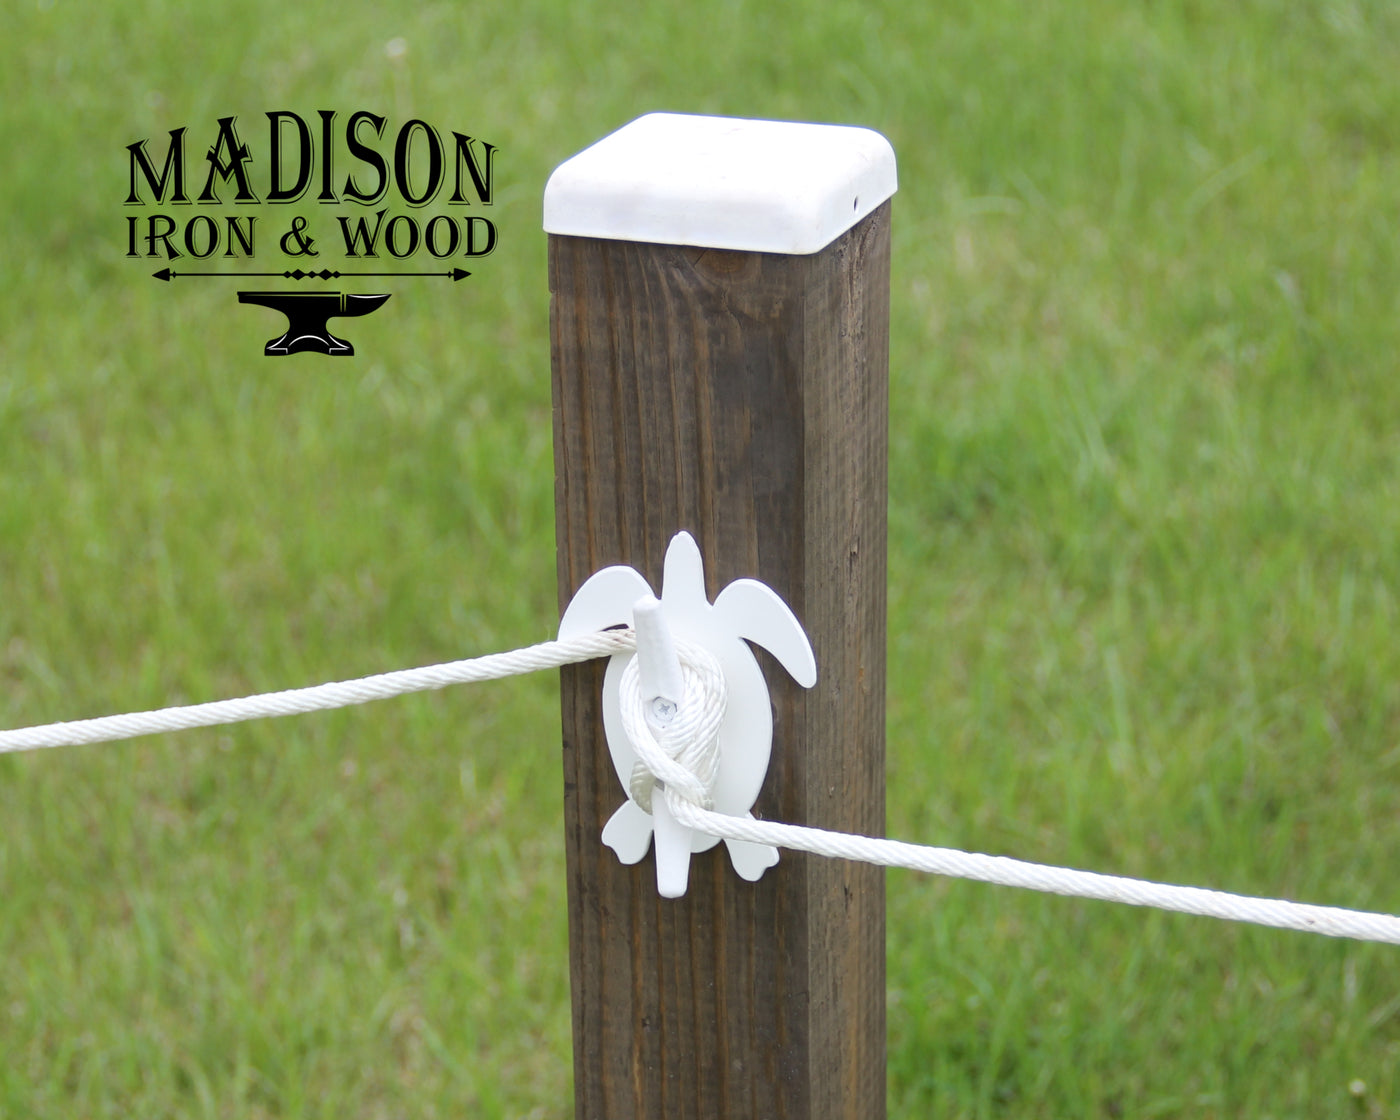 Turtle Nautical Rope Fence Bracket, Boat Tie-off Design - Madison Iron and Wood - Post Cap - metal outdoor decor - Steel deocrations - american made products - veteran owned business products - fencing decorations - fencing supplies - custom wall decorations - personalized wall signs - steel - decorative post caps - steel post caps - metal post caps - brackets - structural brackets - home improvement - easter - easter decorations - easter gift - easter yard decor